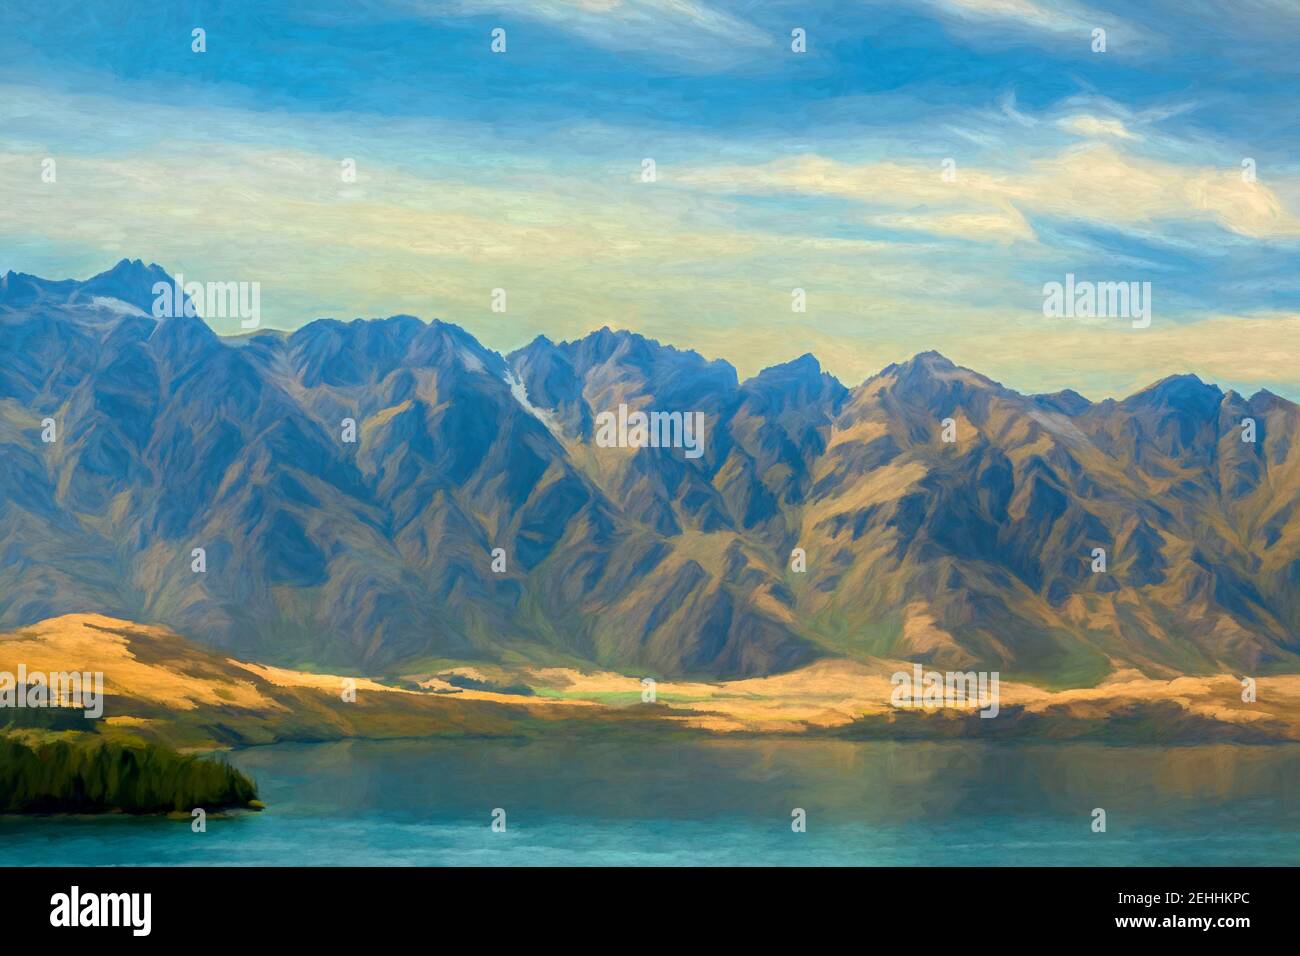 Digital painting of the Remarkables and Lake Wakatipu, Queenstown, New Zealand Stock Photo